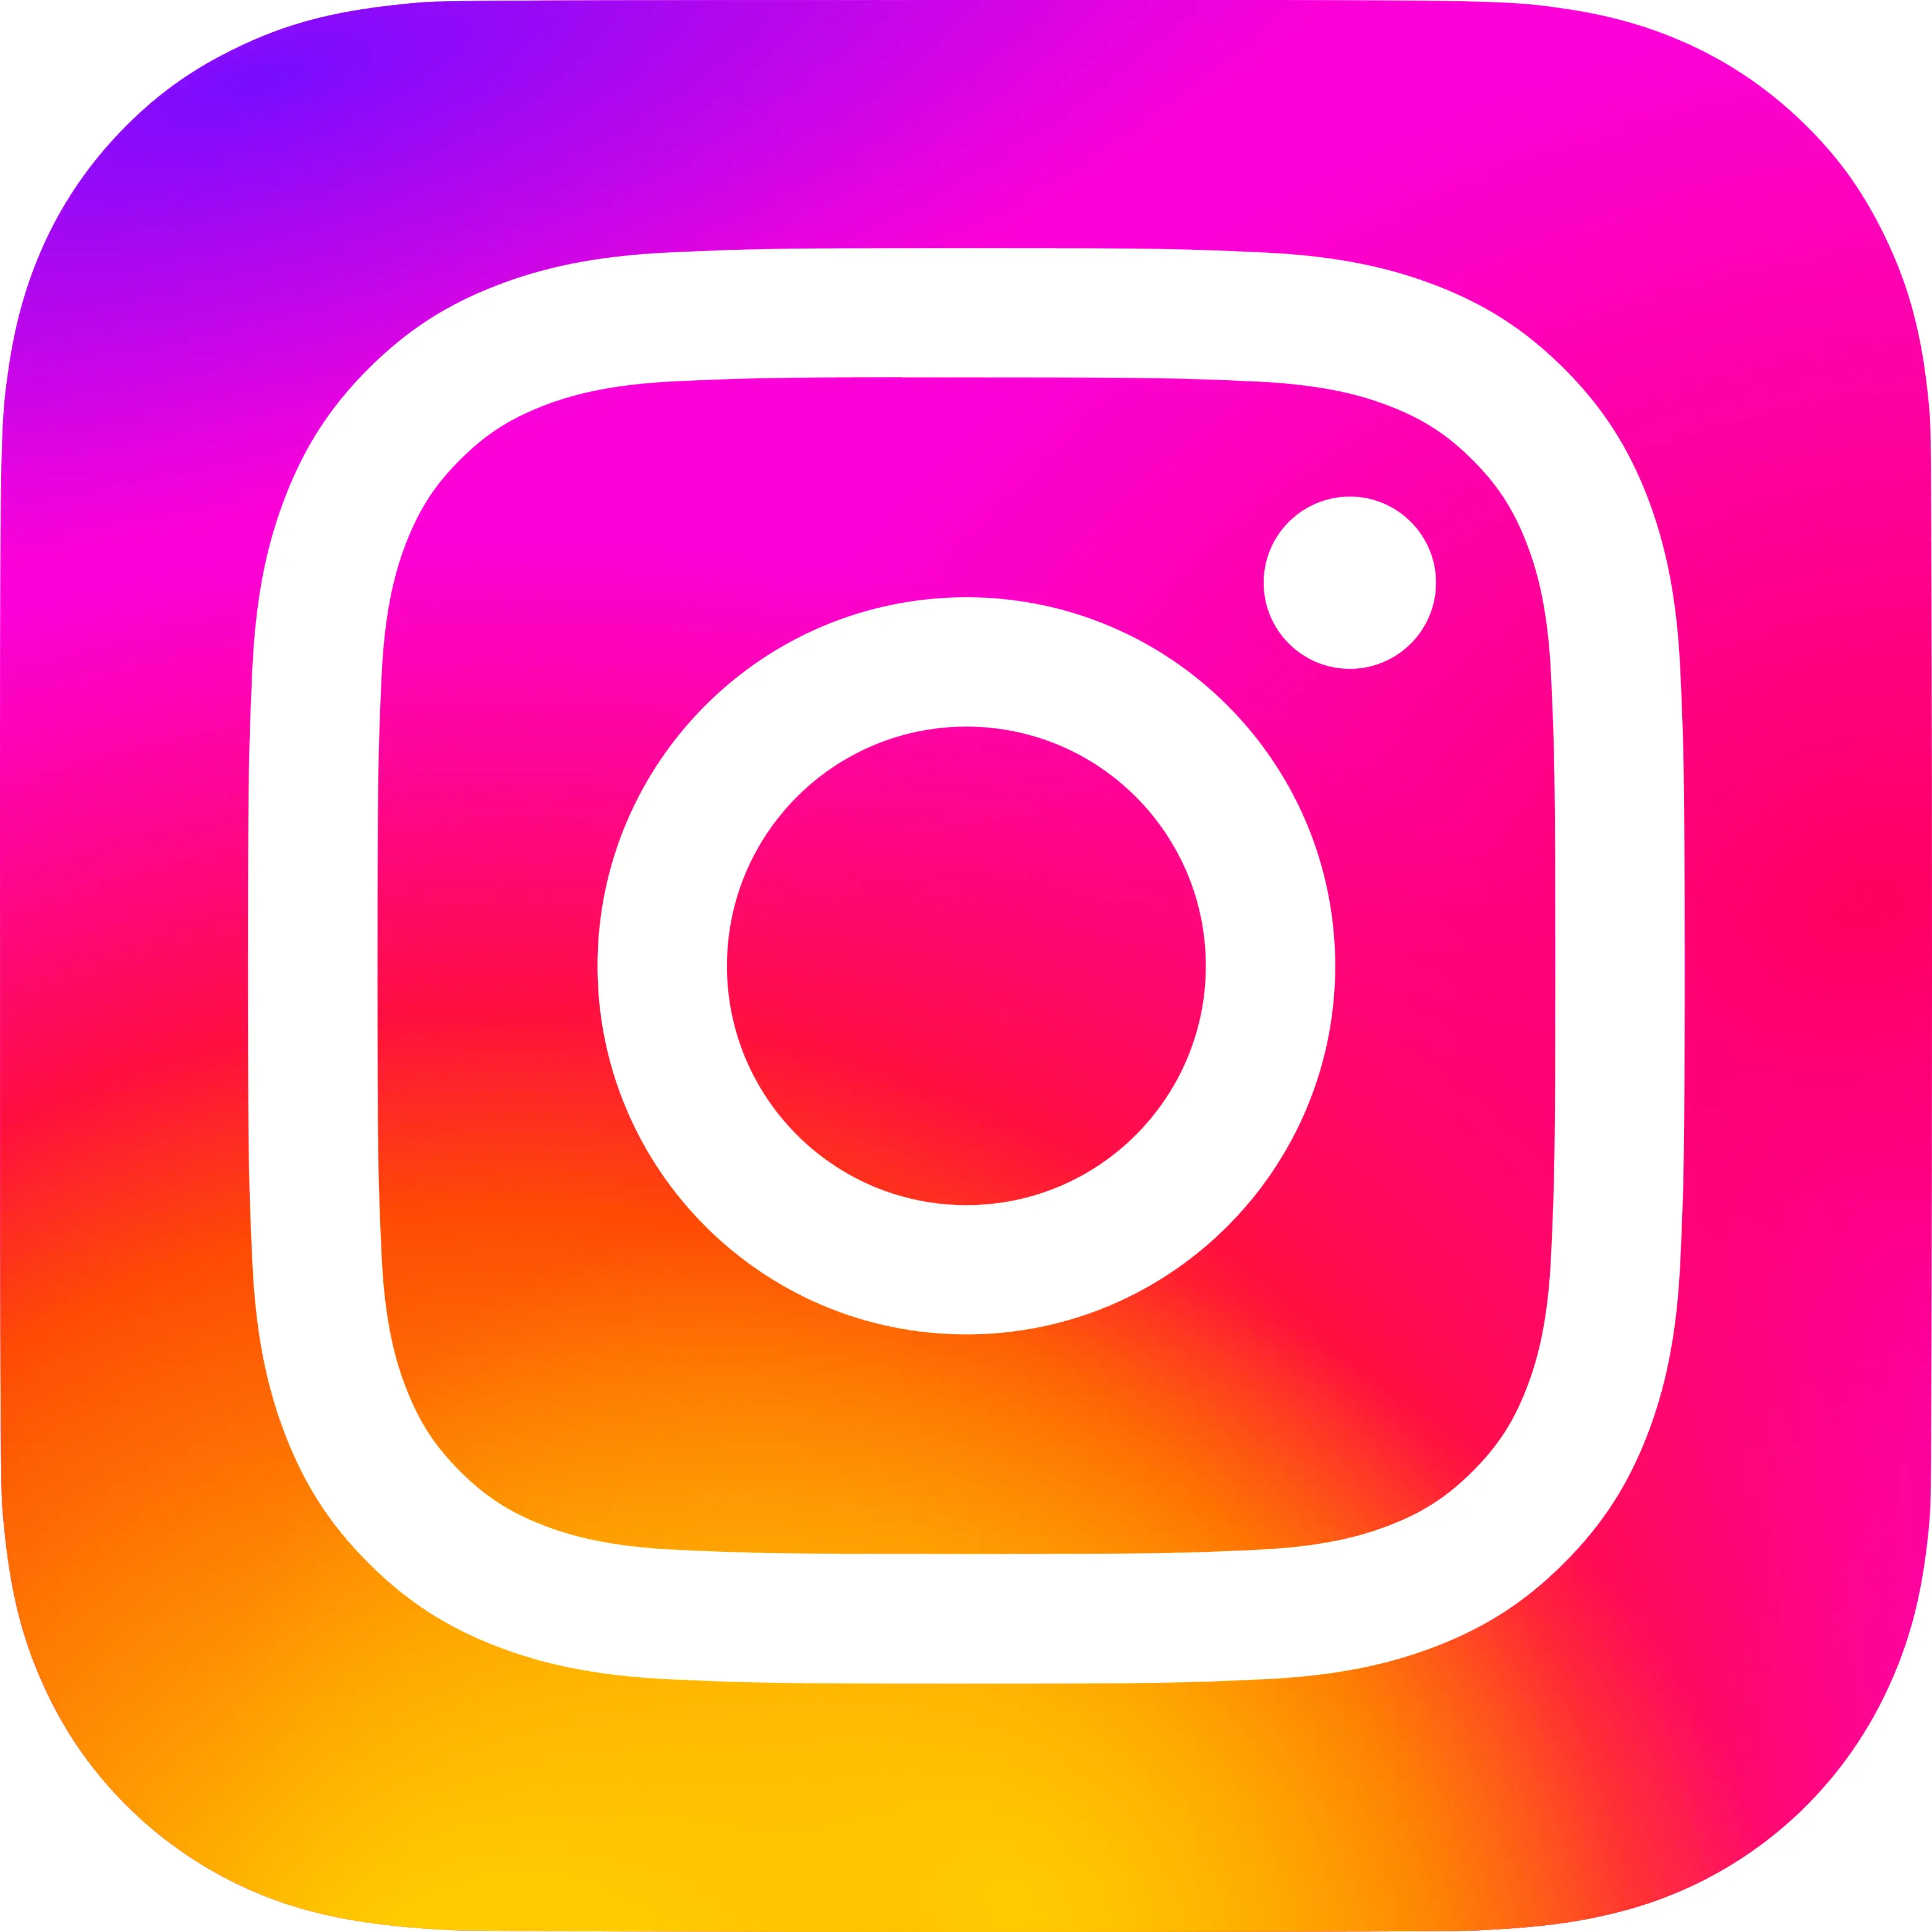 Insta Users soon to be allowed to Create Post from Desktops